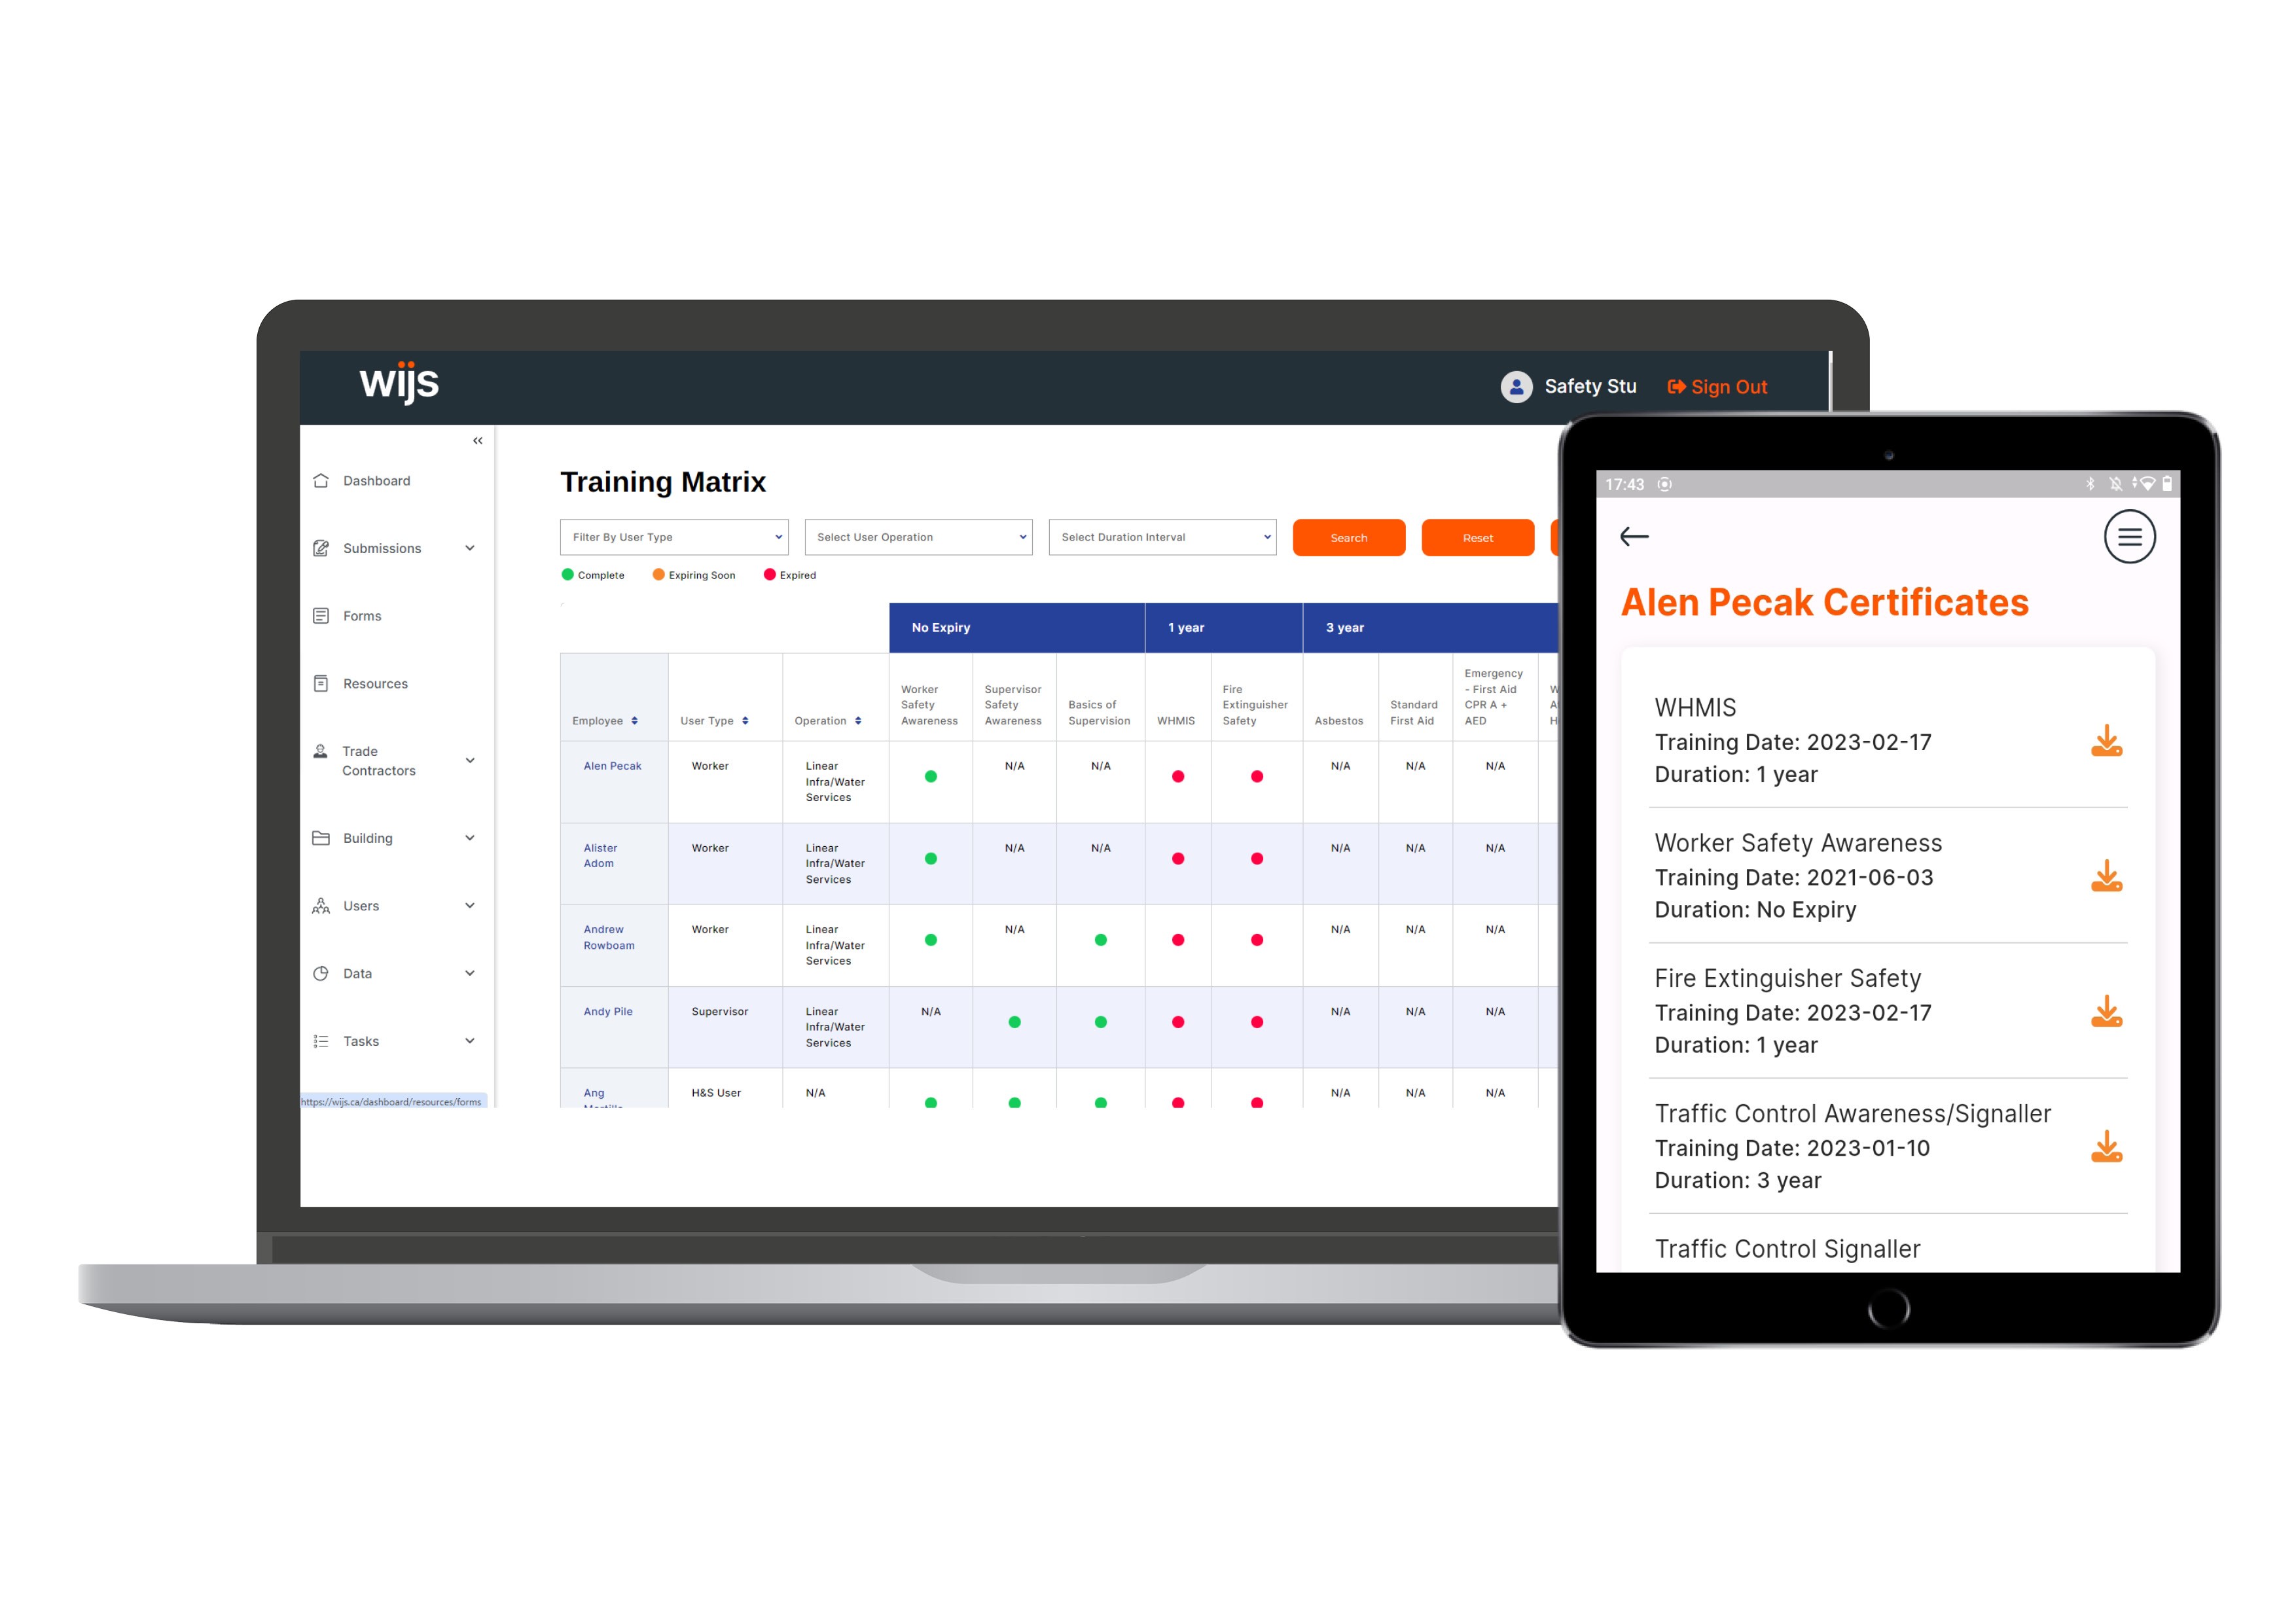 Manage all your trade contractor safety documents with our Trade Contractor Portal. Build a trade contractor profile, assign safety document requirements and track their submission performance just like your own crews.